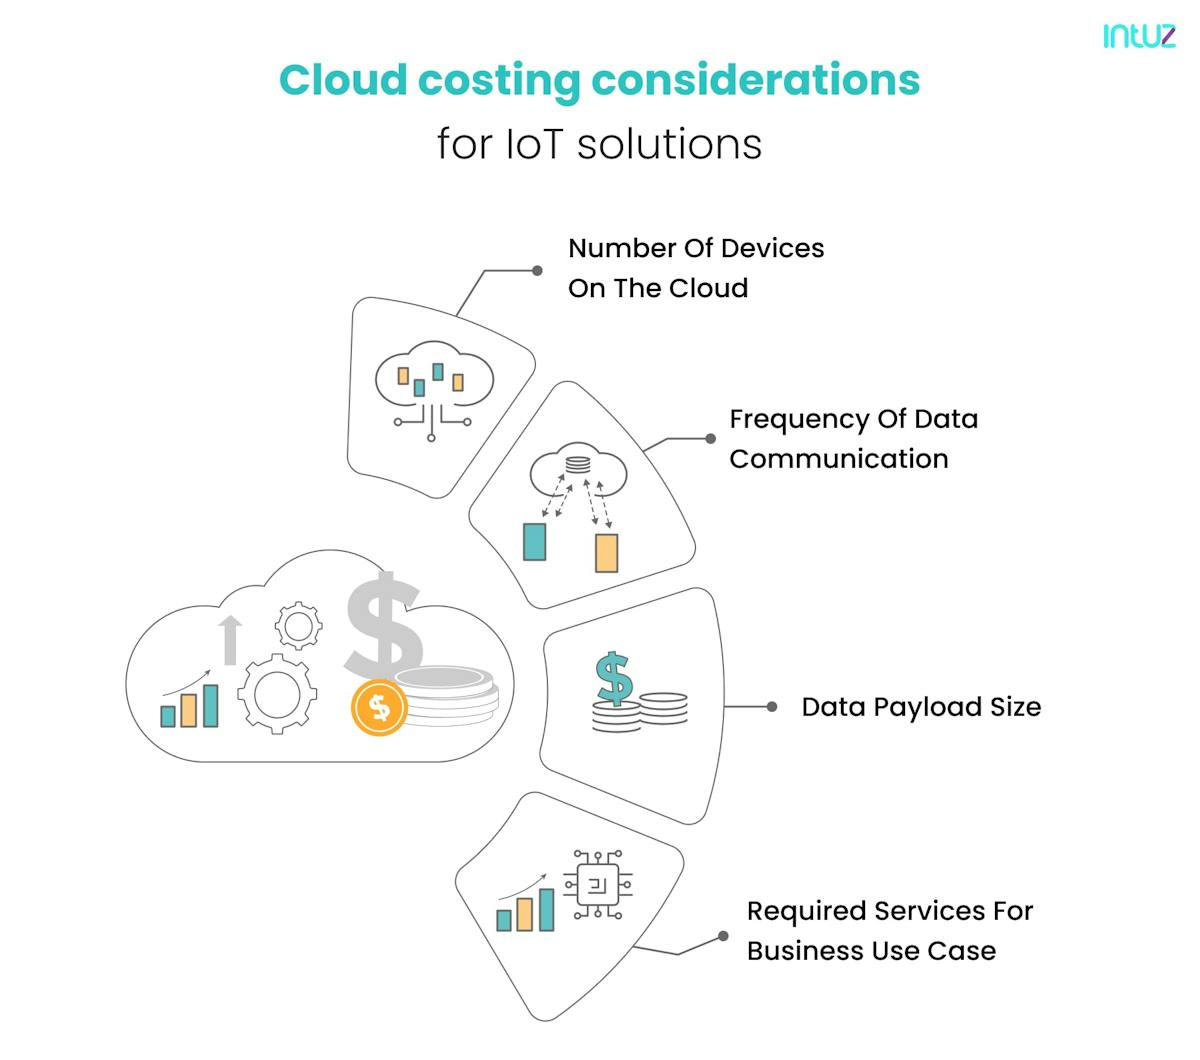 Cloud costing considerations for IoT solutions